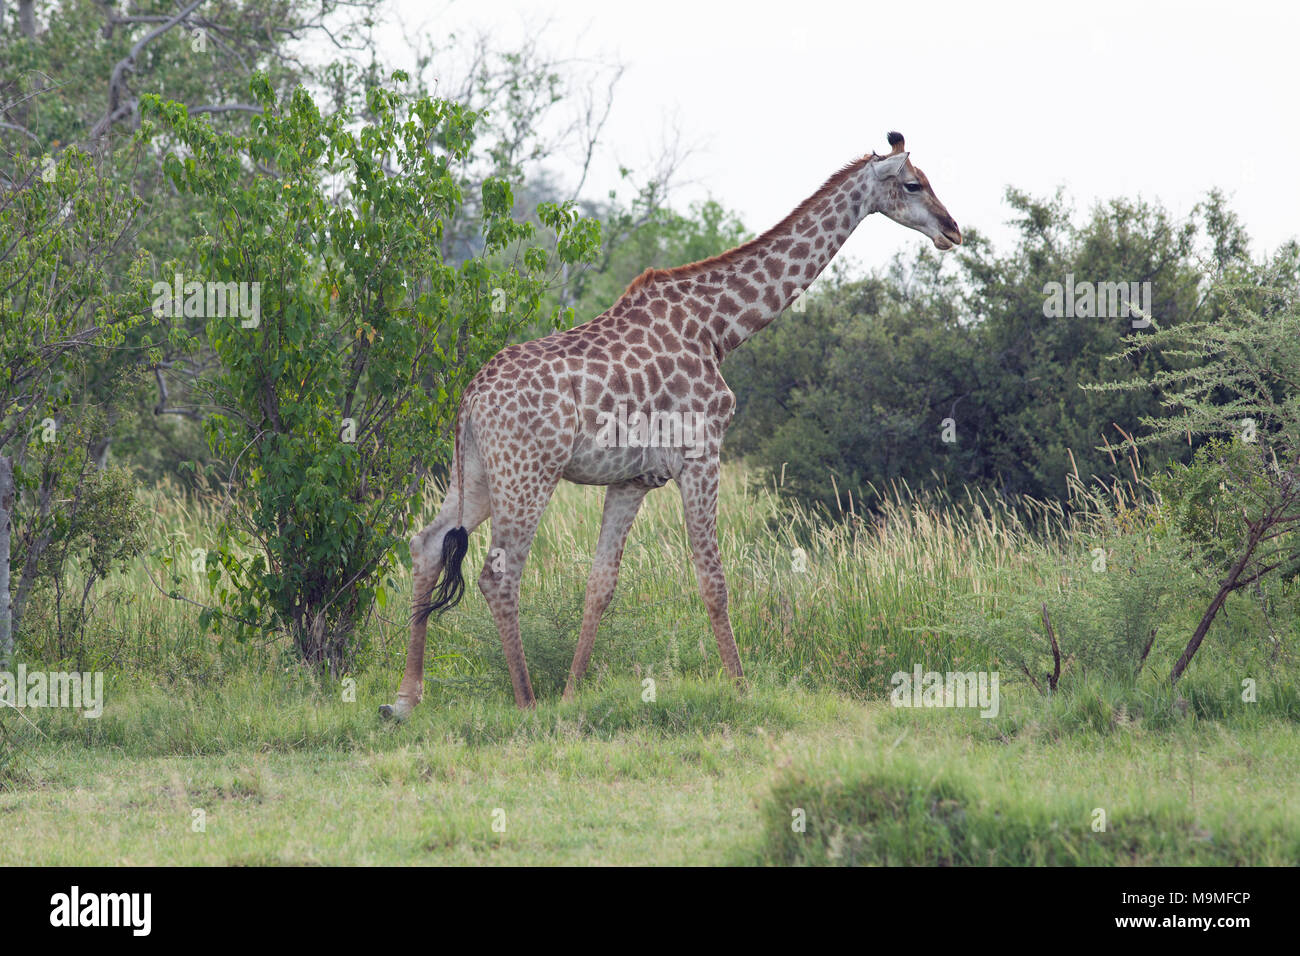 Giraffe (Giraffa camelopardalis angolensis). Note shape, pattern, of coat markings down length of legs, identifying this sub-species. Adult walking be Stock Photo